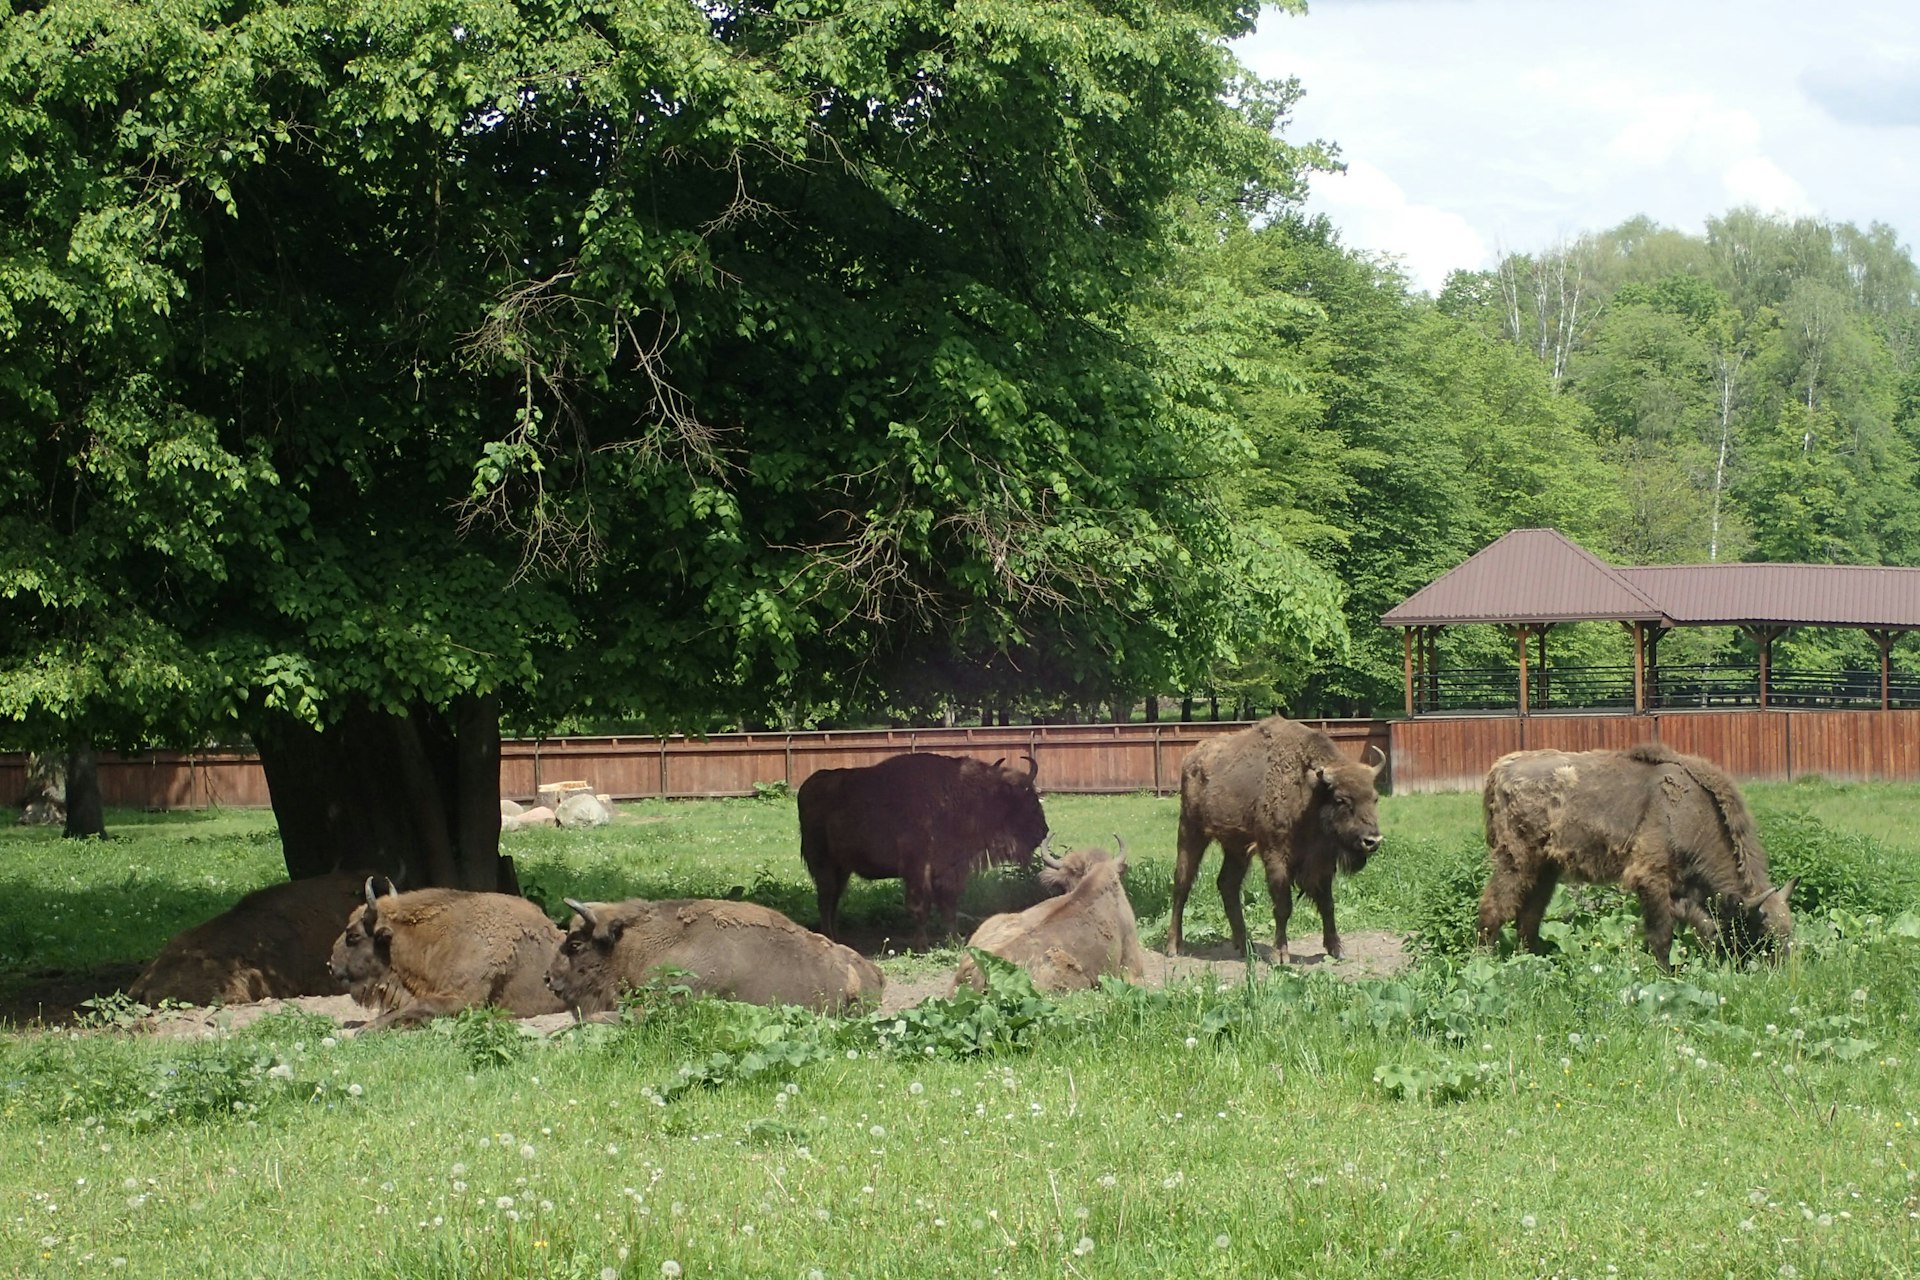 Bison can be seen more easily in the European Bison Show Reserve.